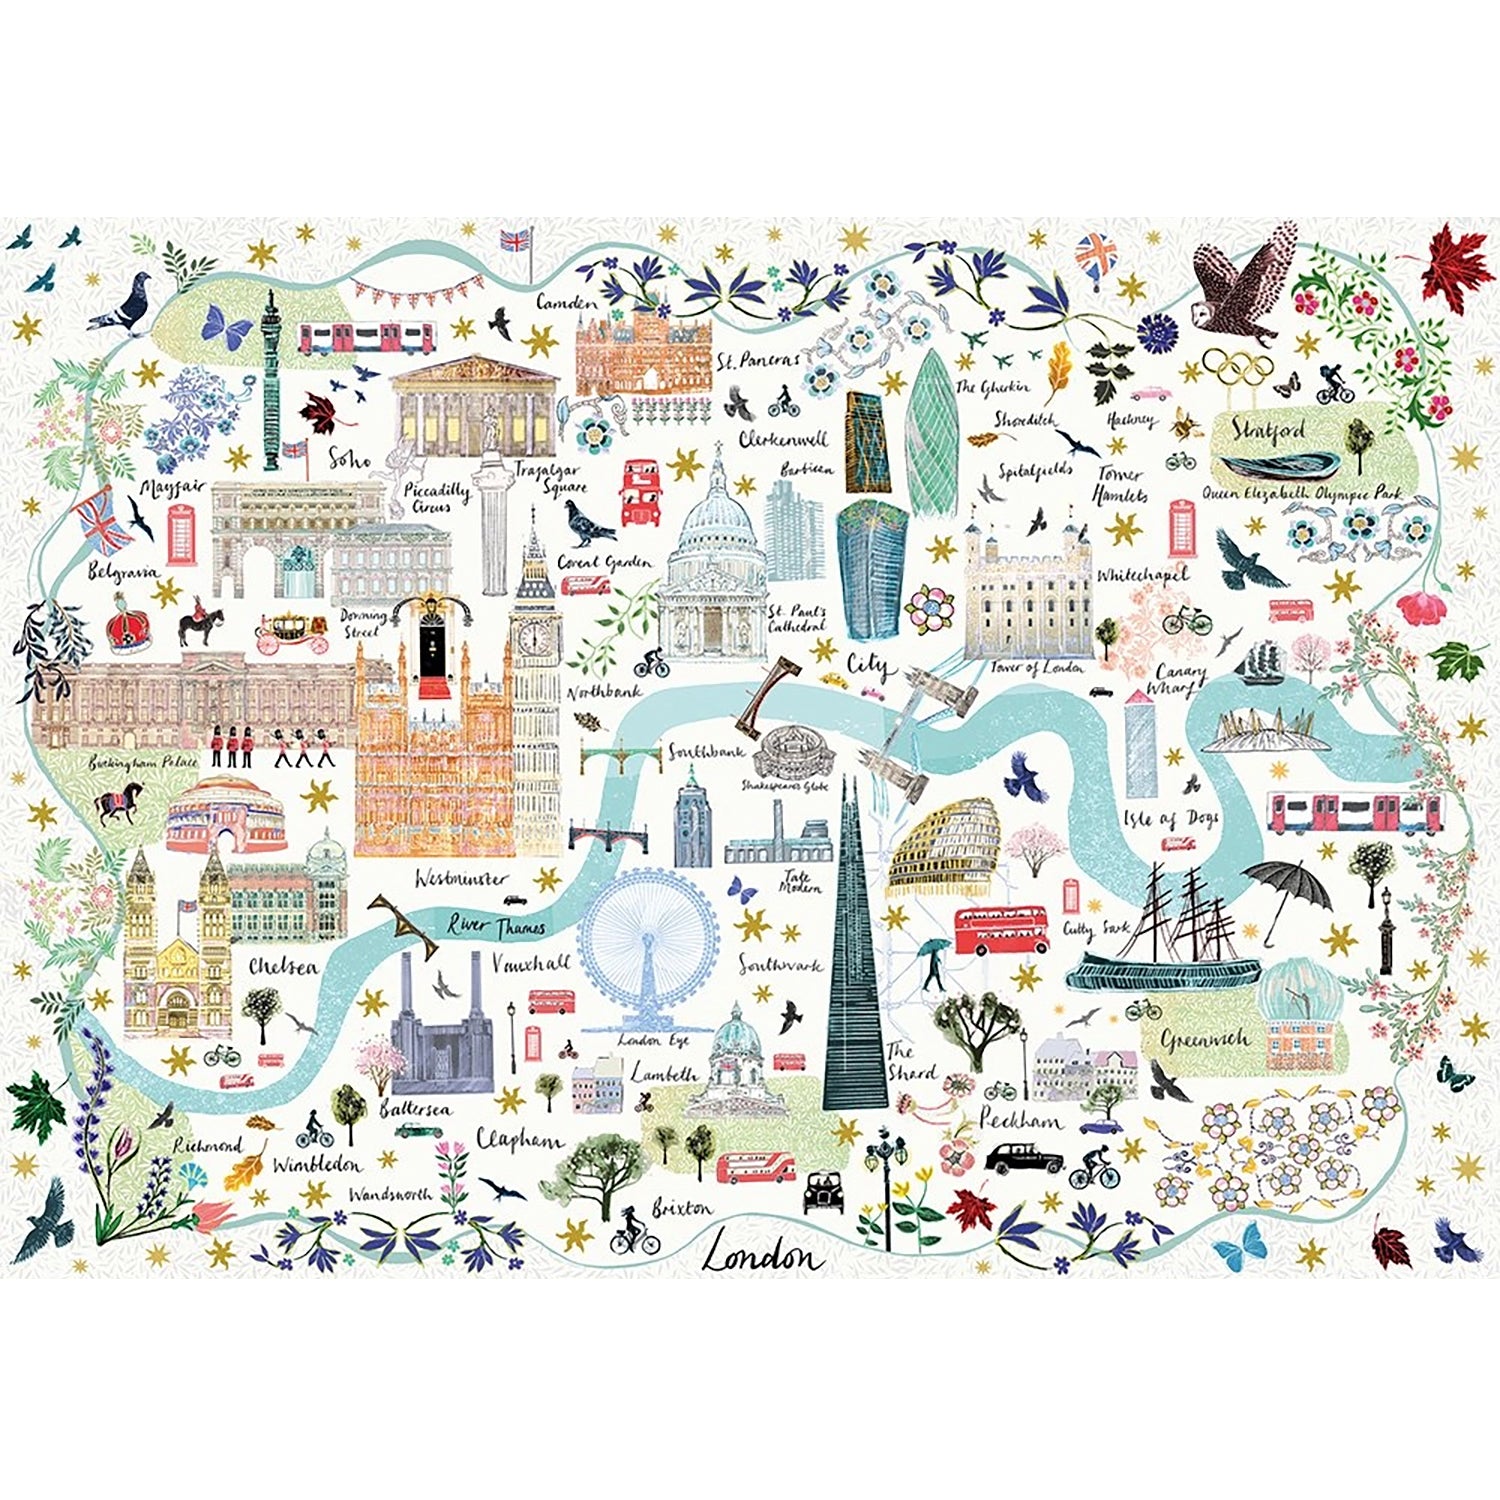 Gibsons Map of London 1000 Piece Puzzle - Josie Shenoy assembled image